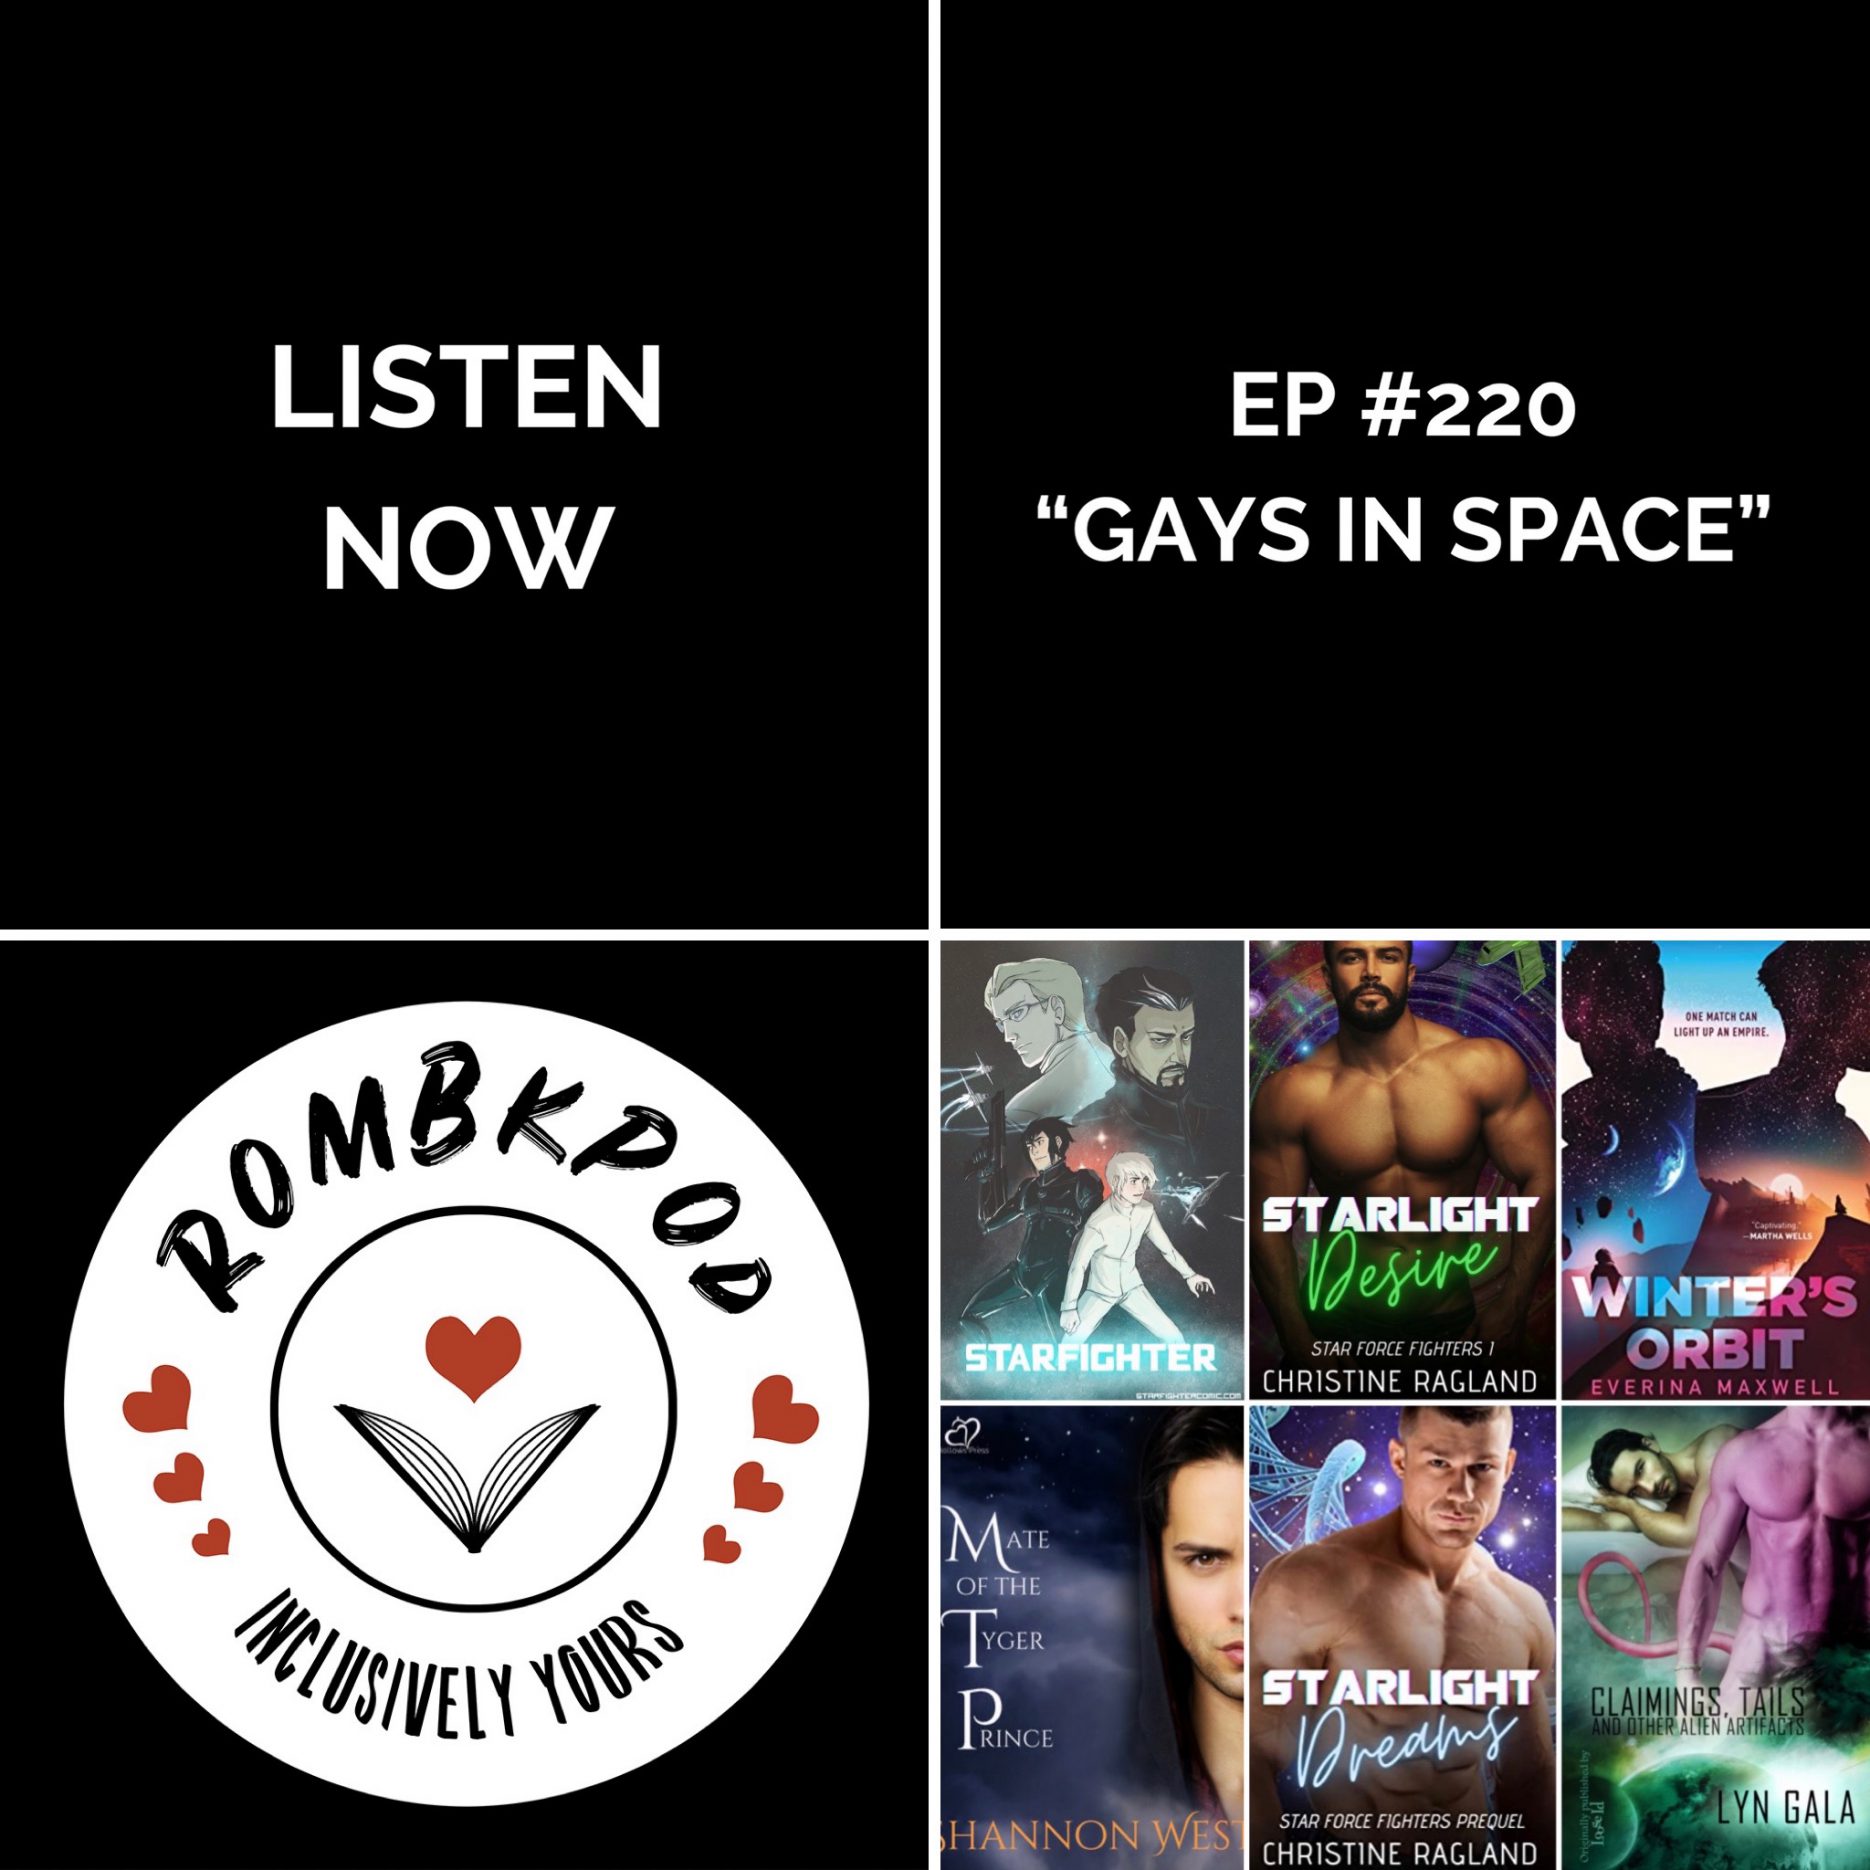 IMAGE: lower left corner, RomBkPod heart logo; lower right corner, ep #220 book cover collage; IMAGE TEXT: Listen Now, ep #220 "Gays in Space"